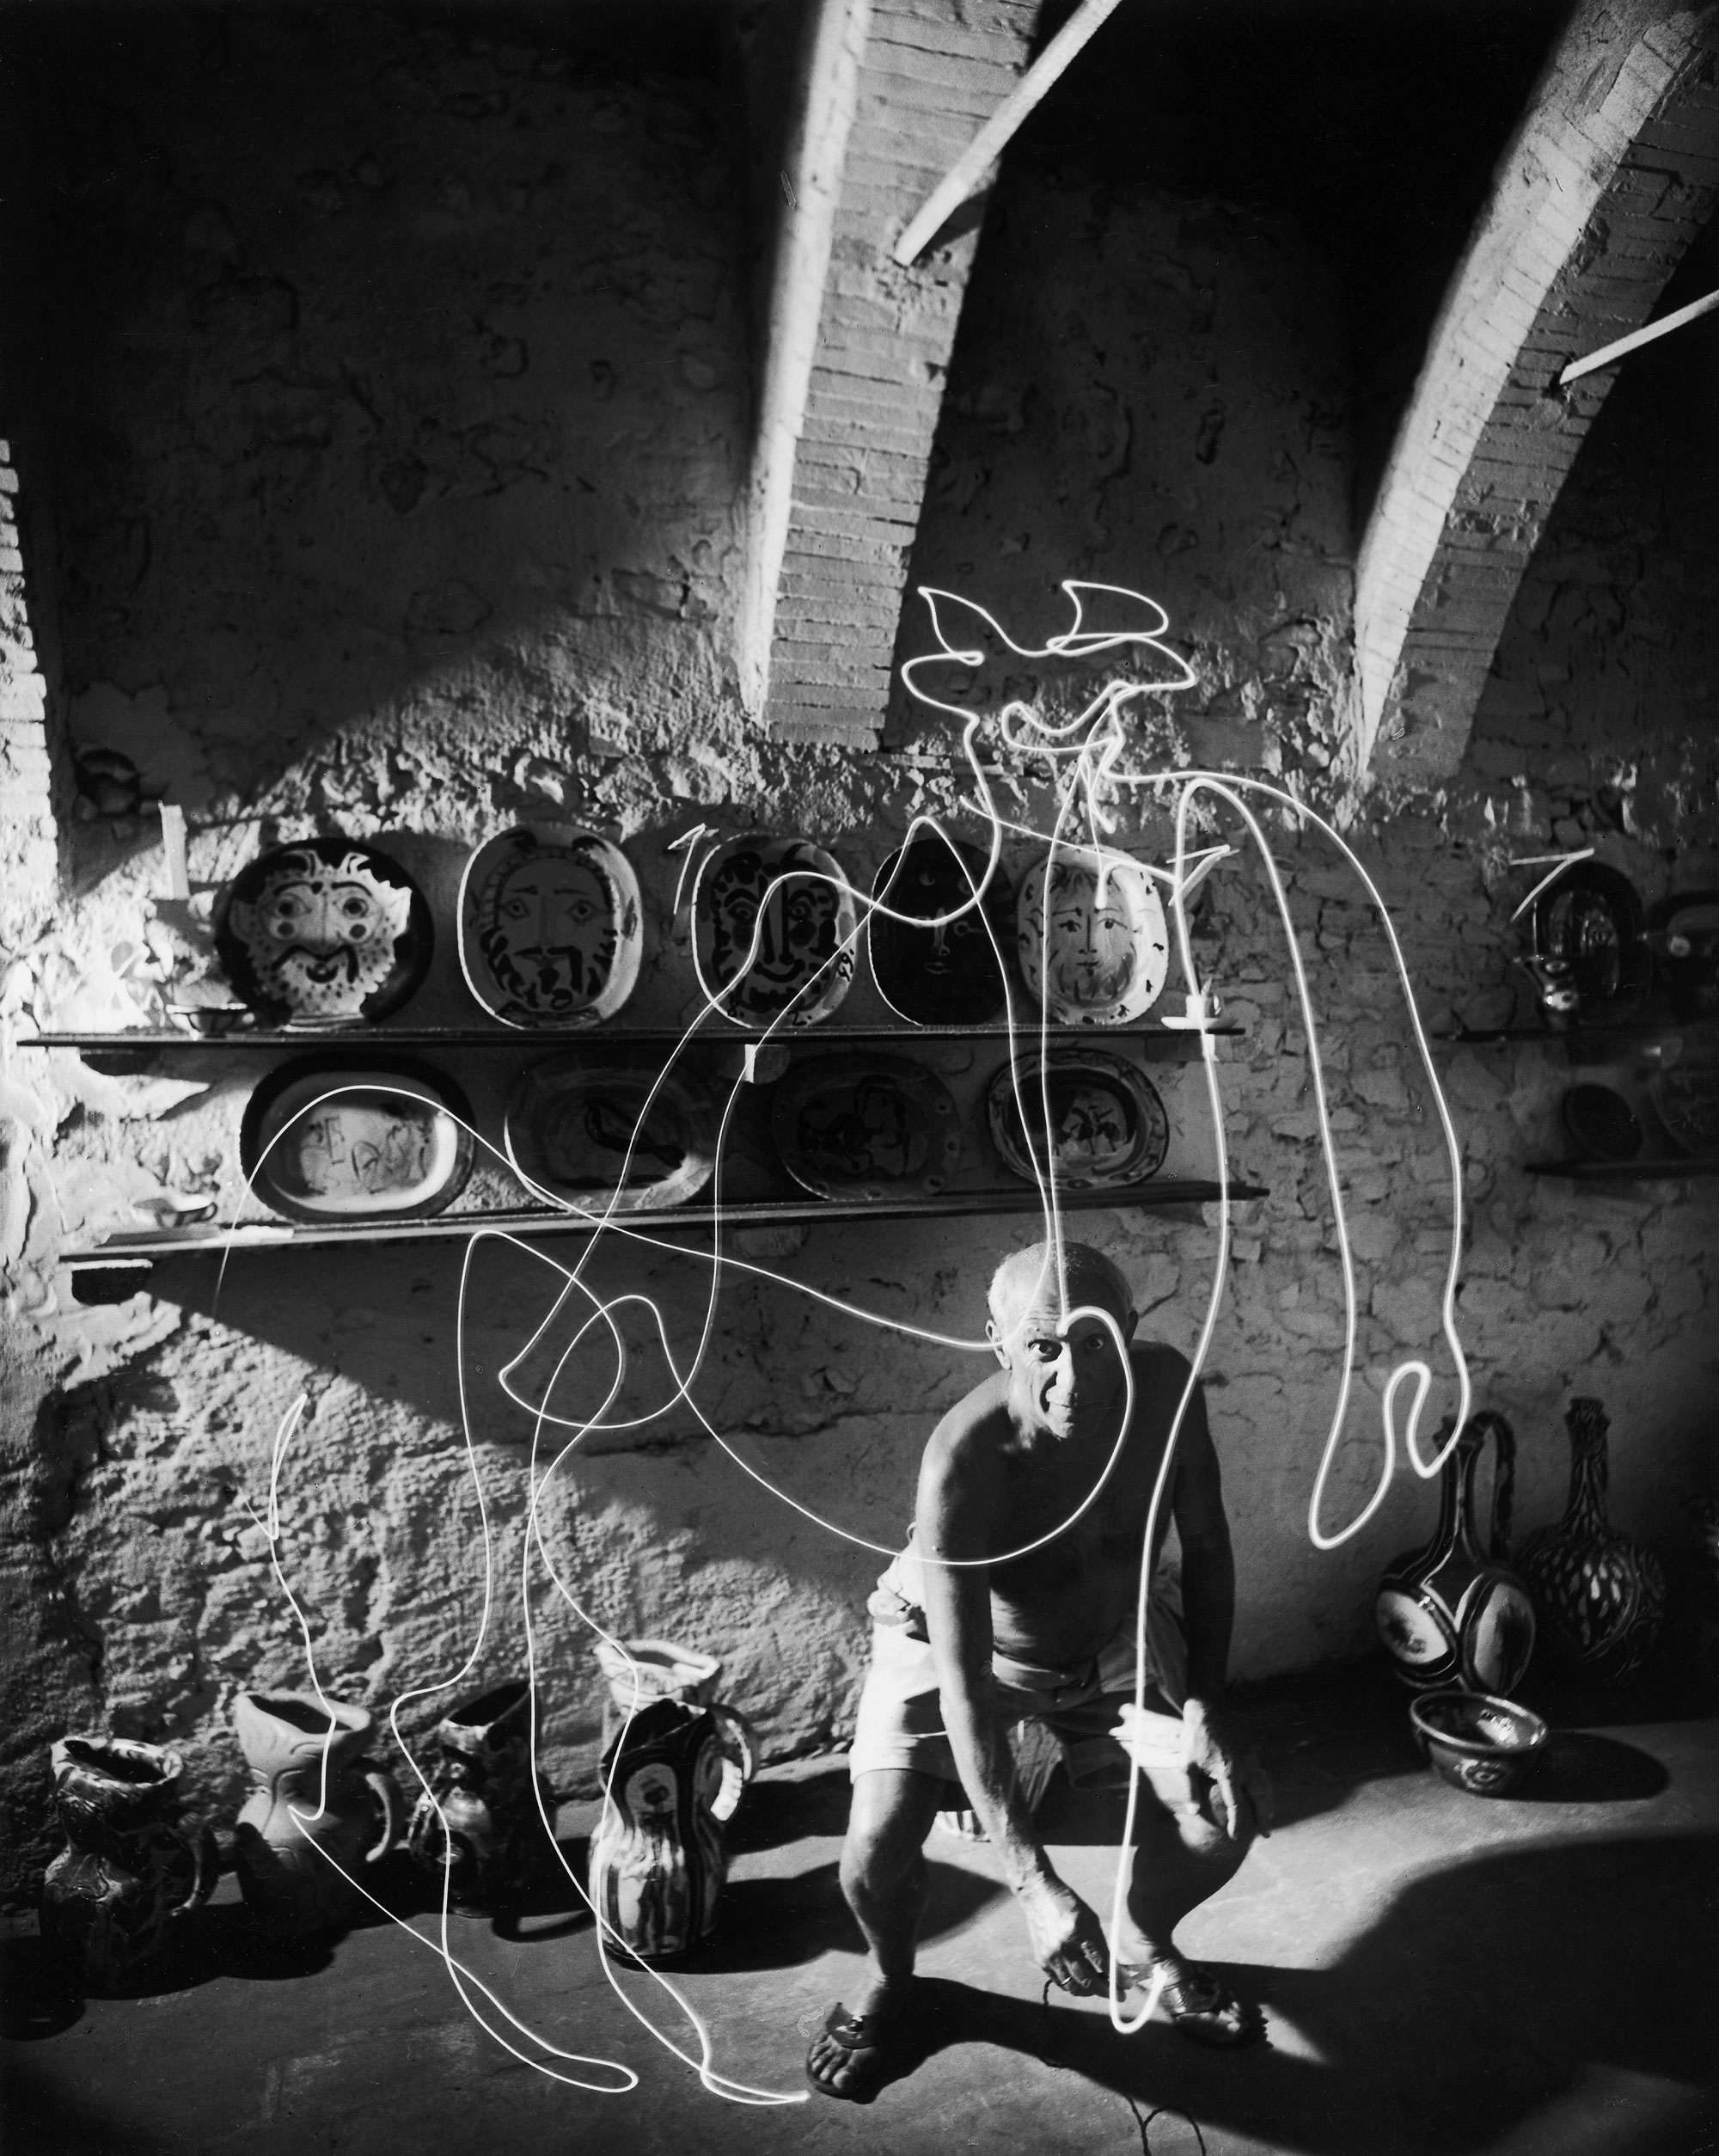 Pablo Picasso "draws" a centaur in the air with light, 1949.